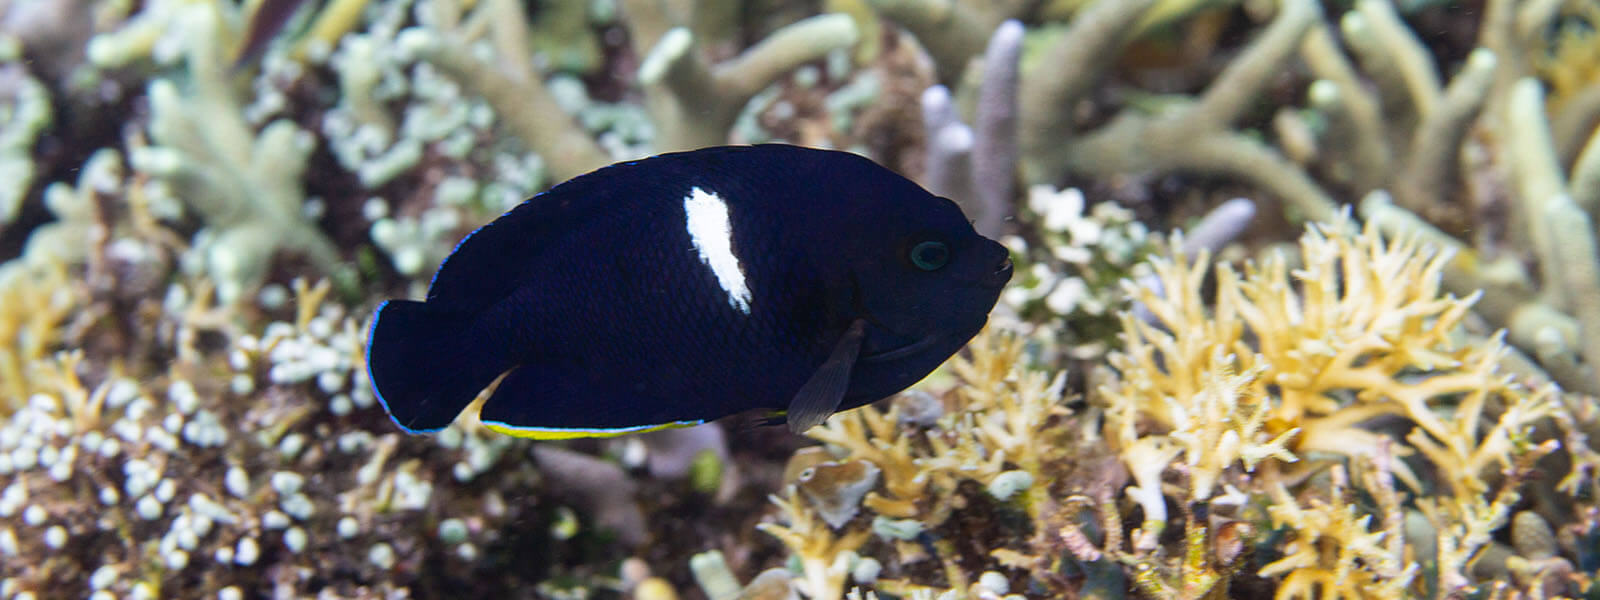 Keyhole Angelfish are common but elusive on reefs in places like Alor, Komodo, Raja Ampat, and Philippines